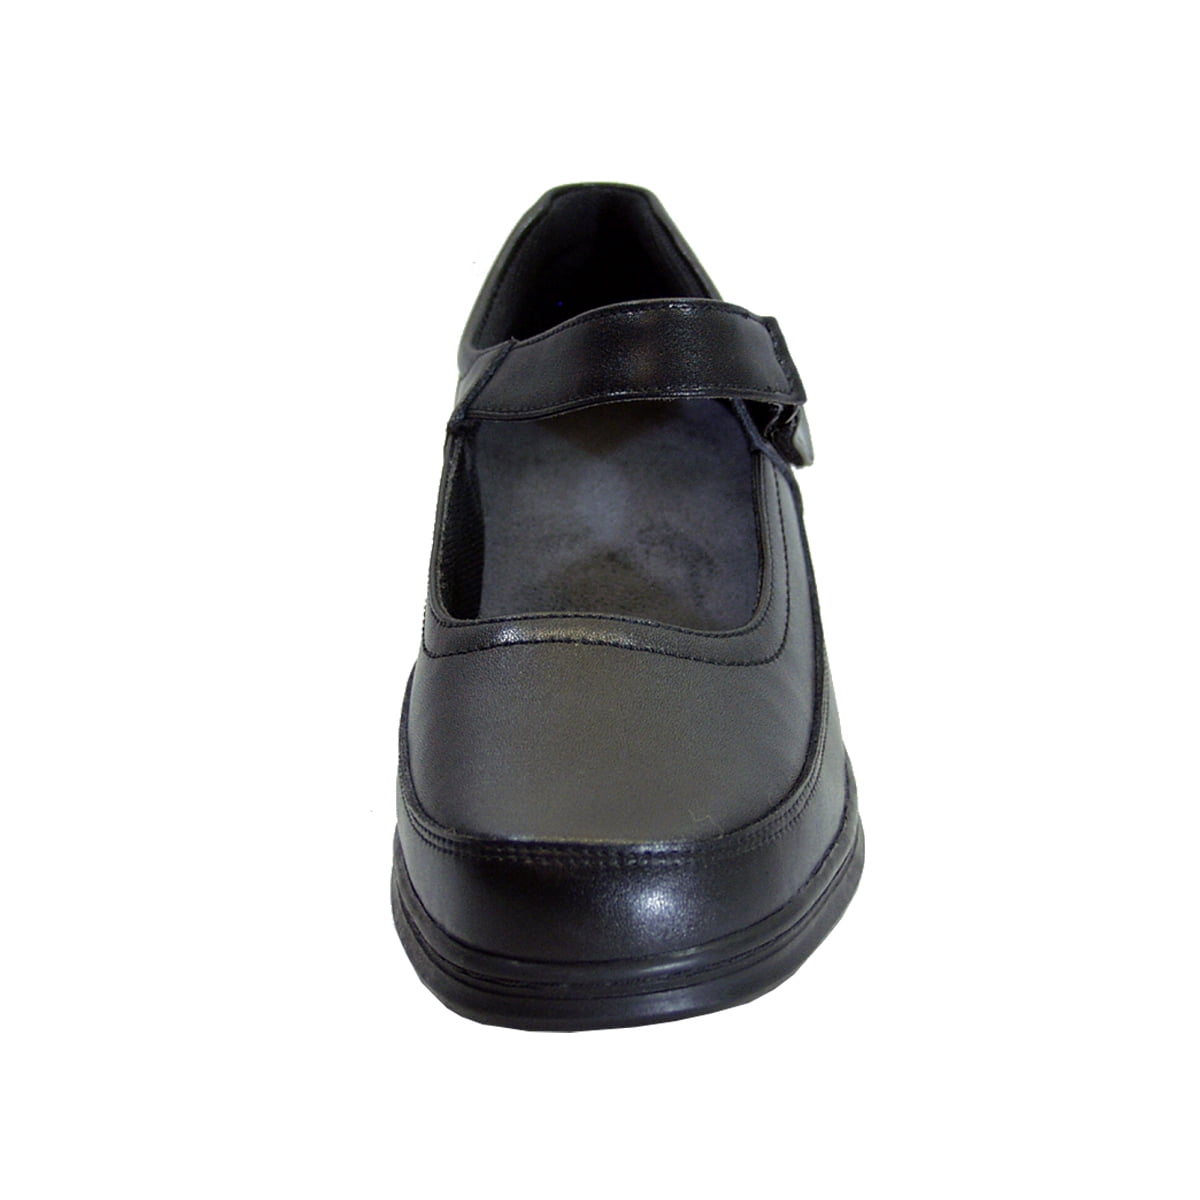 24 HOUR COMFORT Louis Wide Width Comfort Shoes For Work and Casual